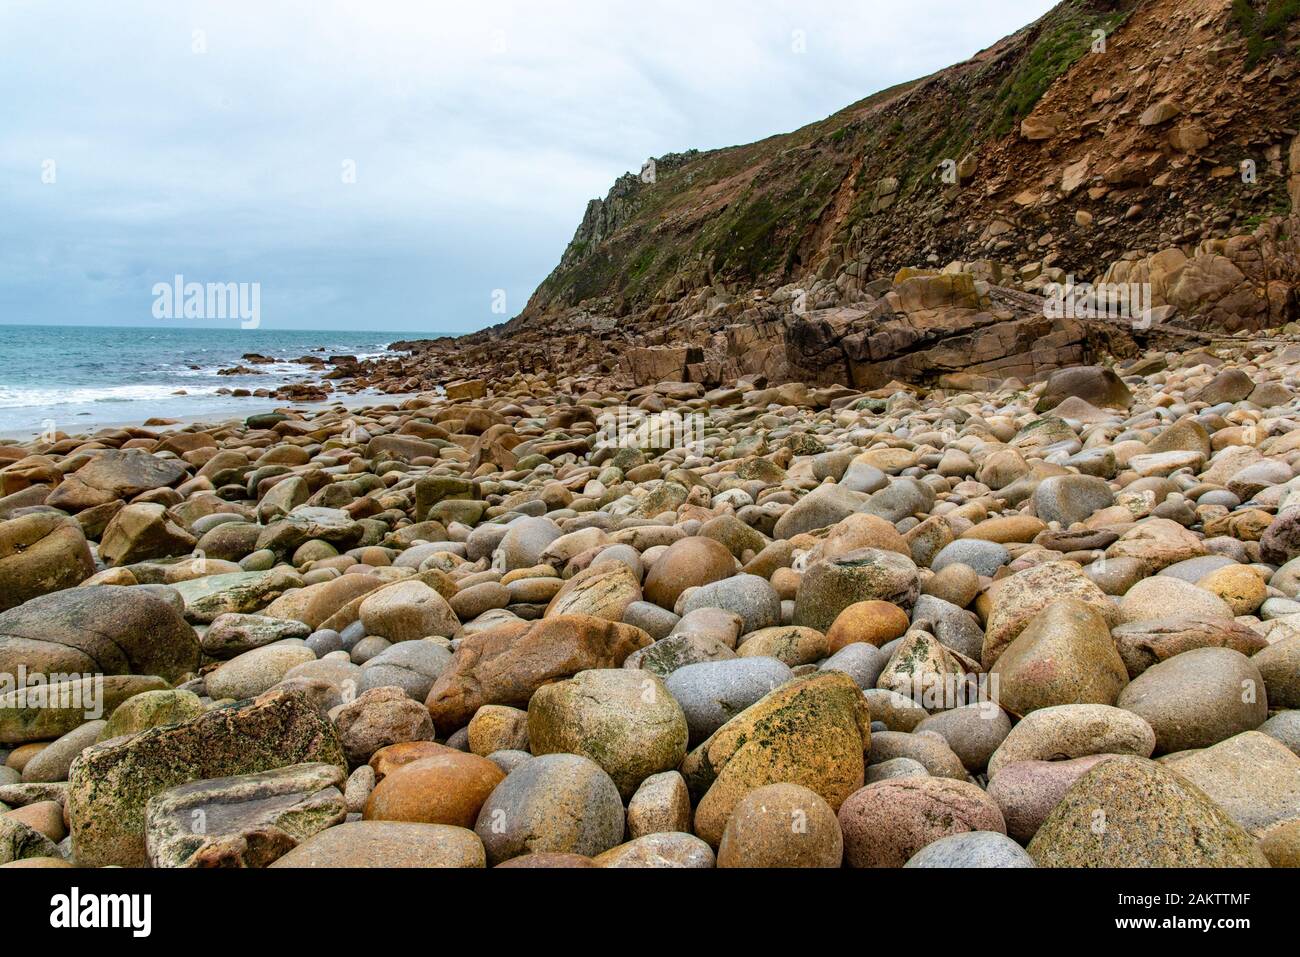 The 'Dinosaur Egg' beach at Porth Nanven, St Just, Cornwall is composed of large rounded boulders. Stock Photo